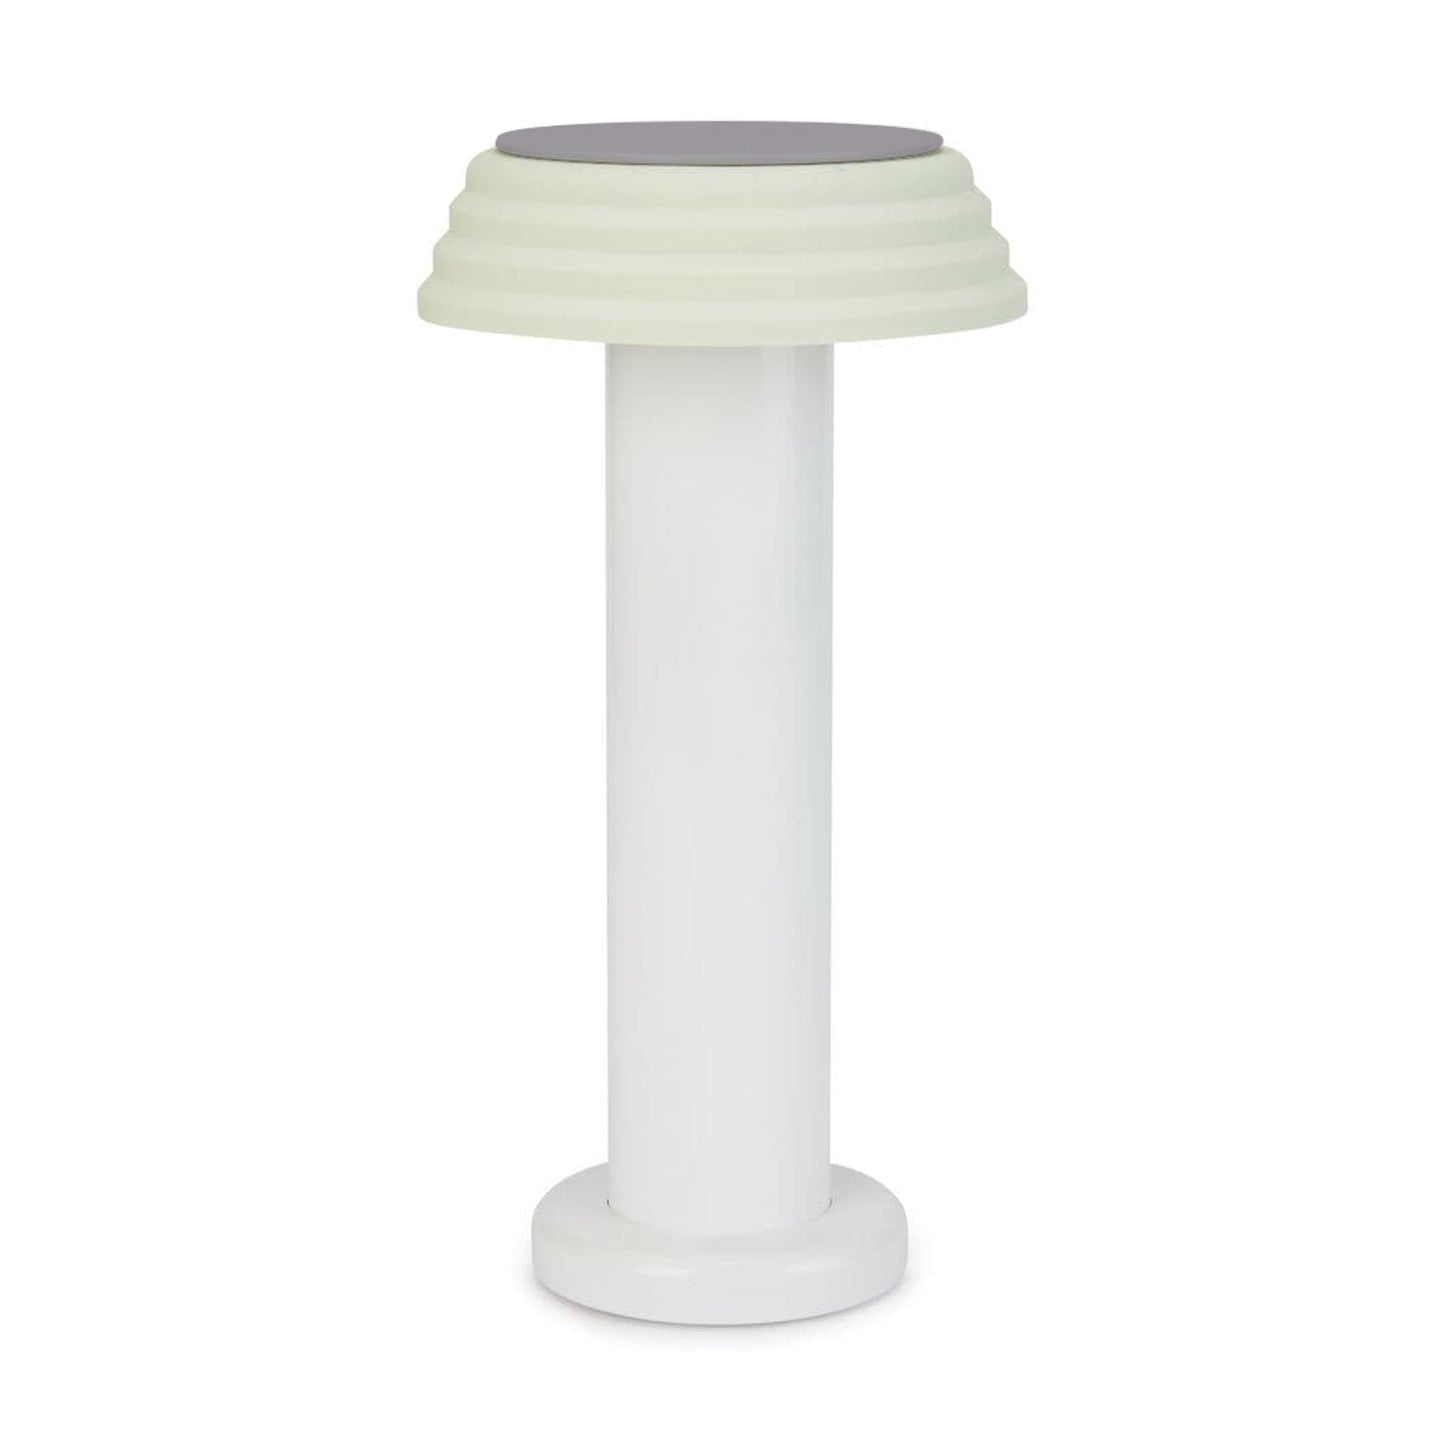 PL1 Portable Lamp by Sowden #White / Mint